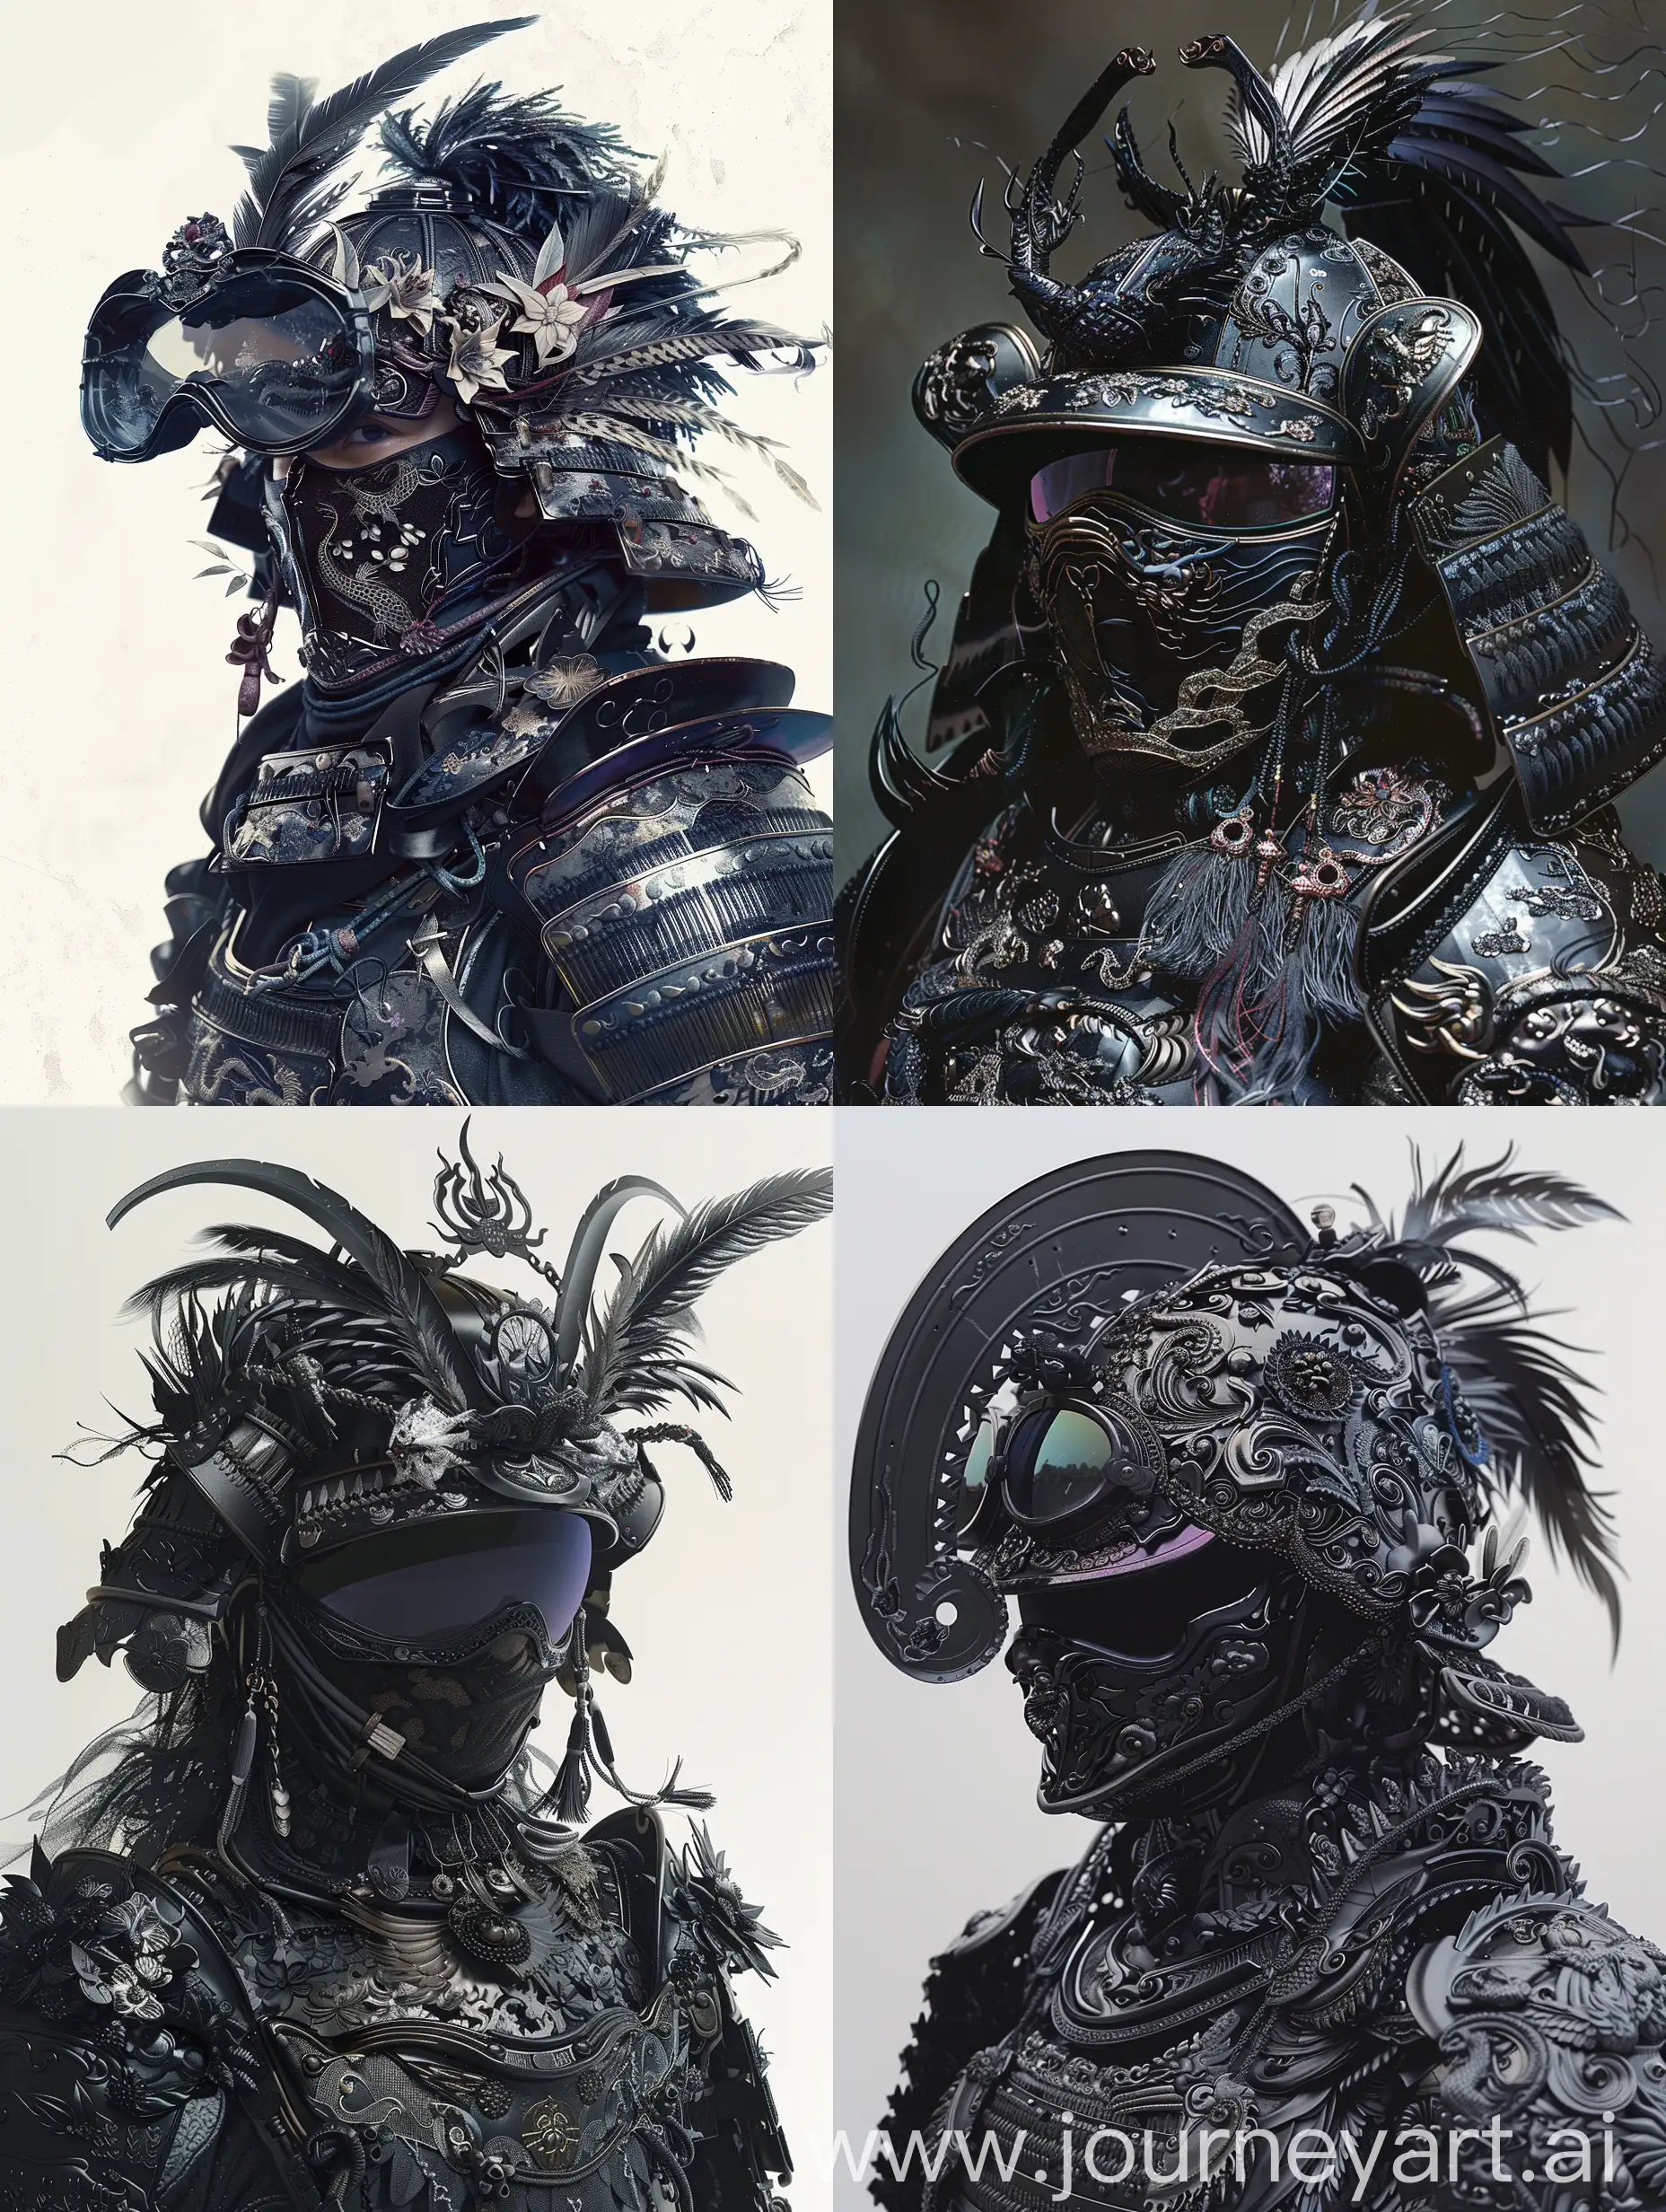 A highly detailed and ornate samurai warrior wears an elaborate suit of armor in various shades of black. The helmet features intricate decorations with feathered and floral elements, a large, curved crest, and detailed embellishments. The mask and armor plates are adorned with delicate patterns, including and dragons, and the samurai's face is partially hidden behind tinted goggles. The overall color scheme is predominantly black, creating a visually striking and unique look. The armor gleams as if it were brand new."